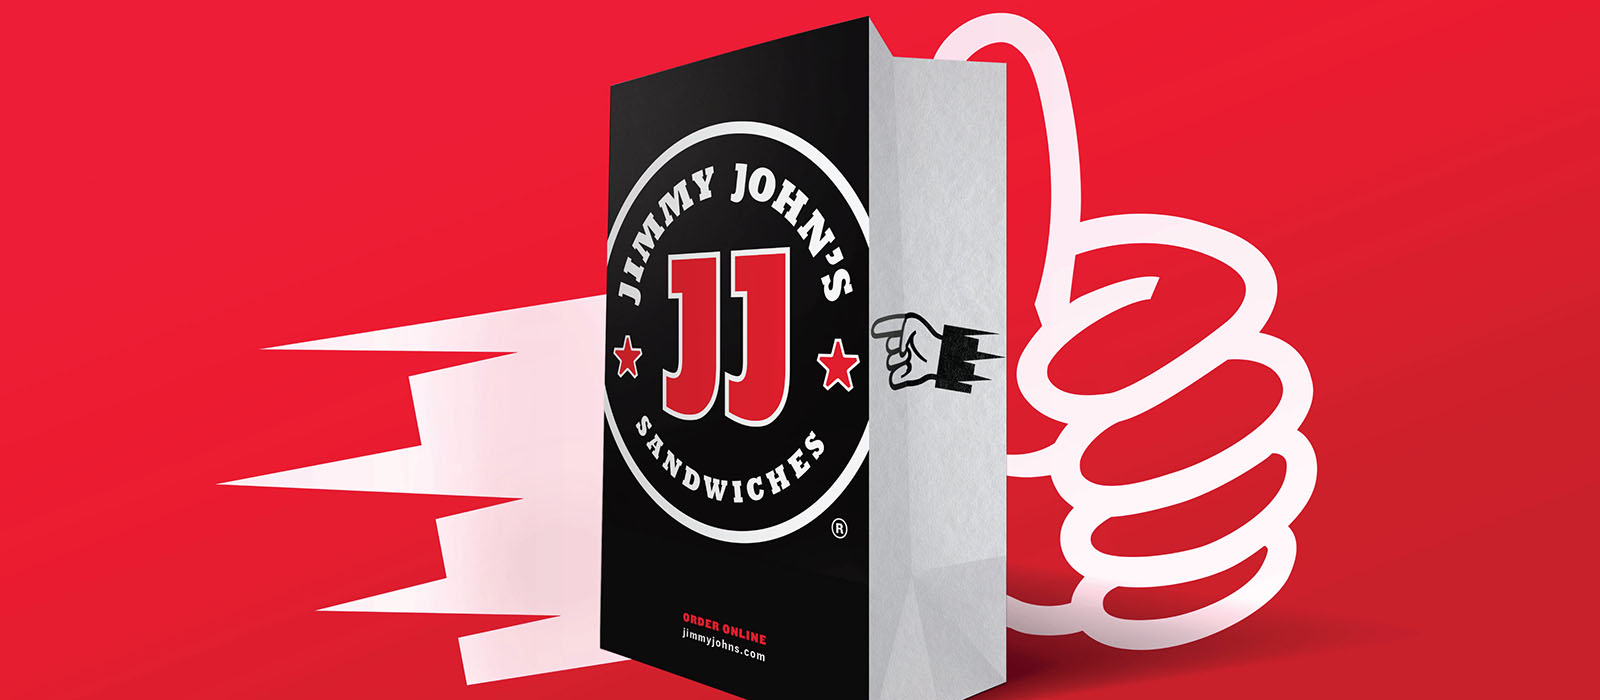 Jimmy John's to go bags